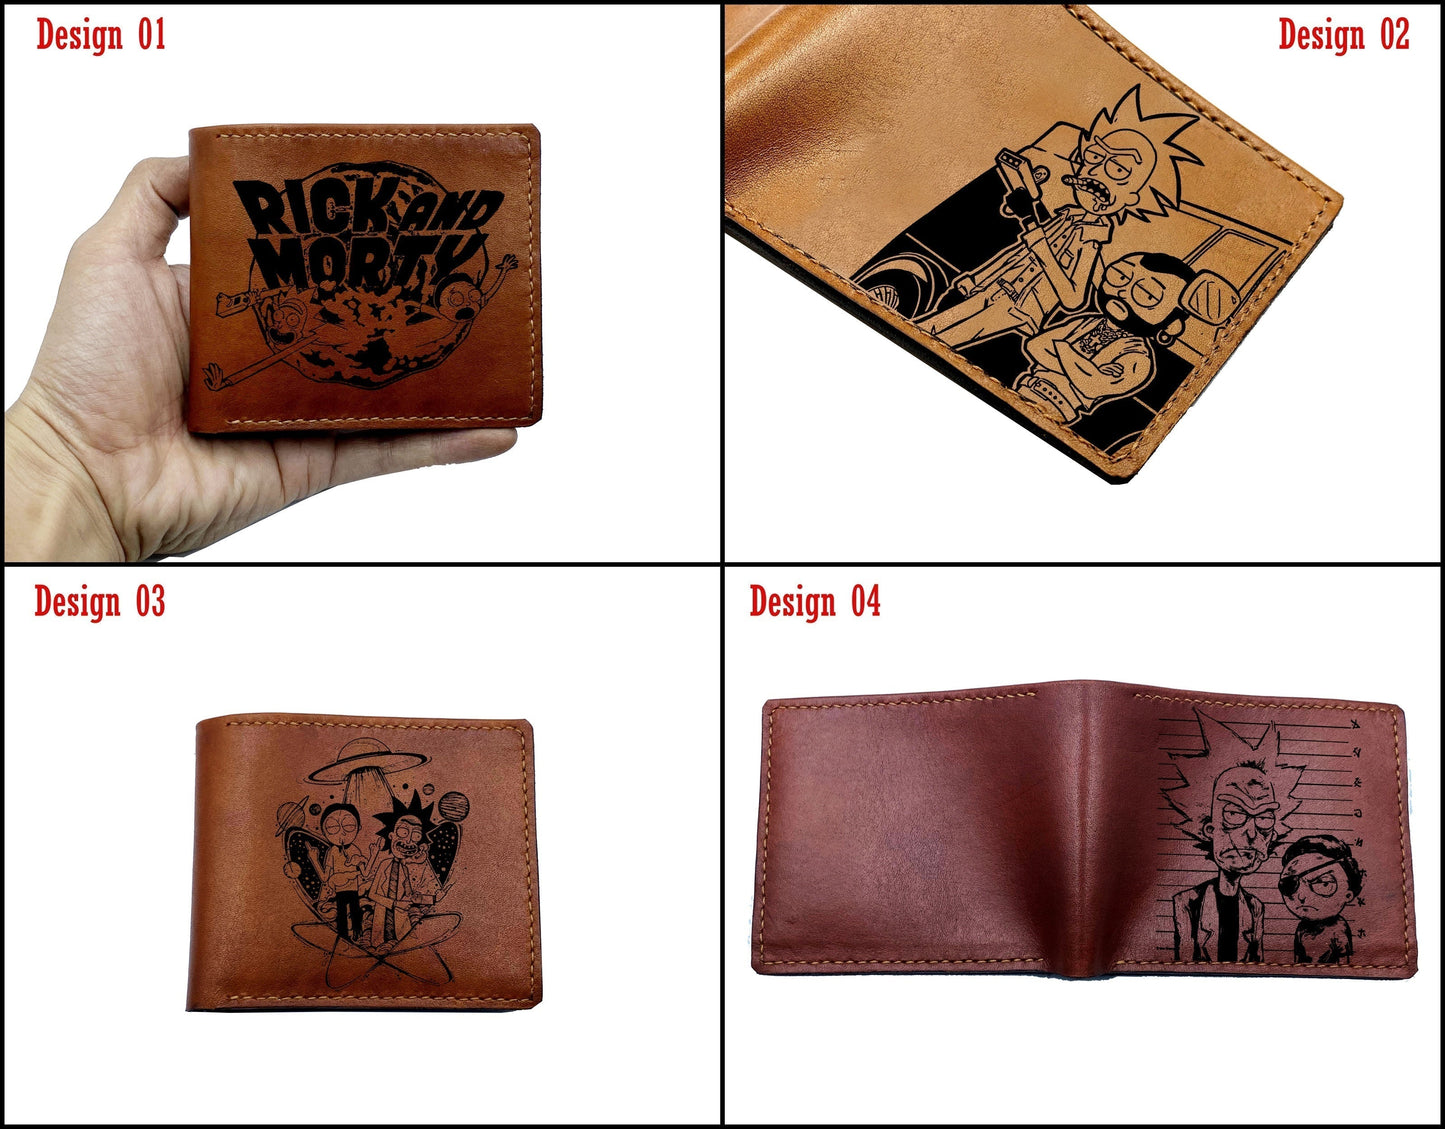 Mayan Corner - Rick and Morty movie series characters leather men's wallet, cartoon art wallet, cool leather gift for him - RM280107